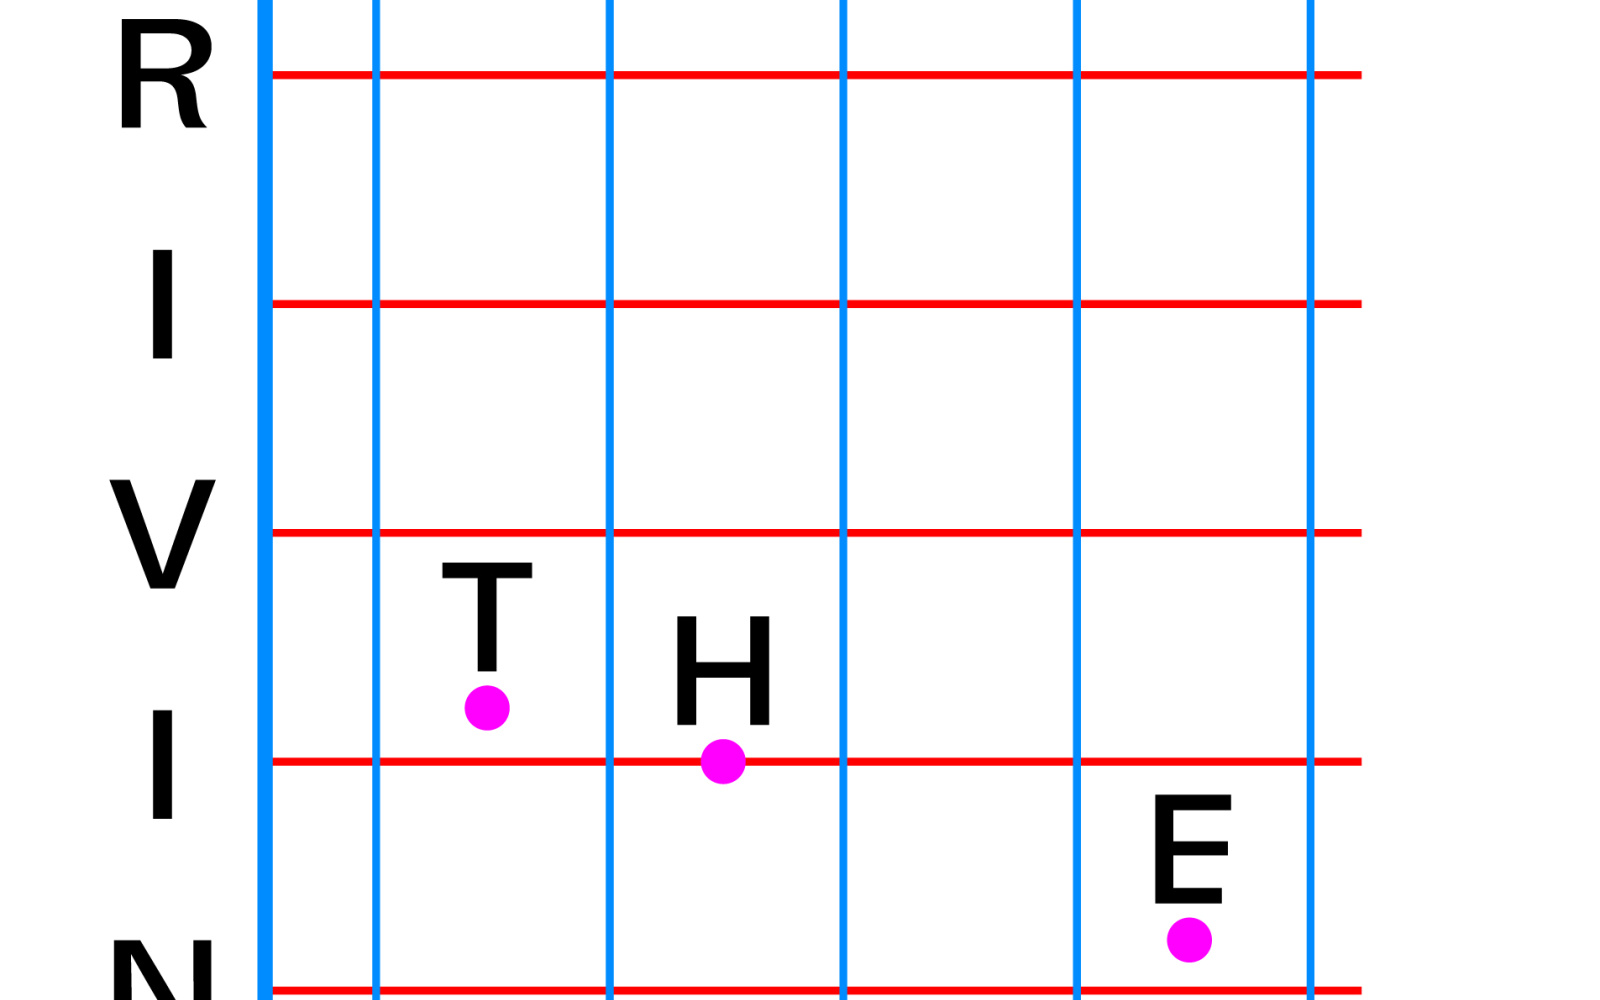 A coordinate system. The vertical axis is called "Drive" and the horizontal axis is called "Human". In the center are 3 coordinate points that carry "The".